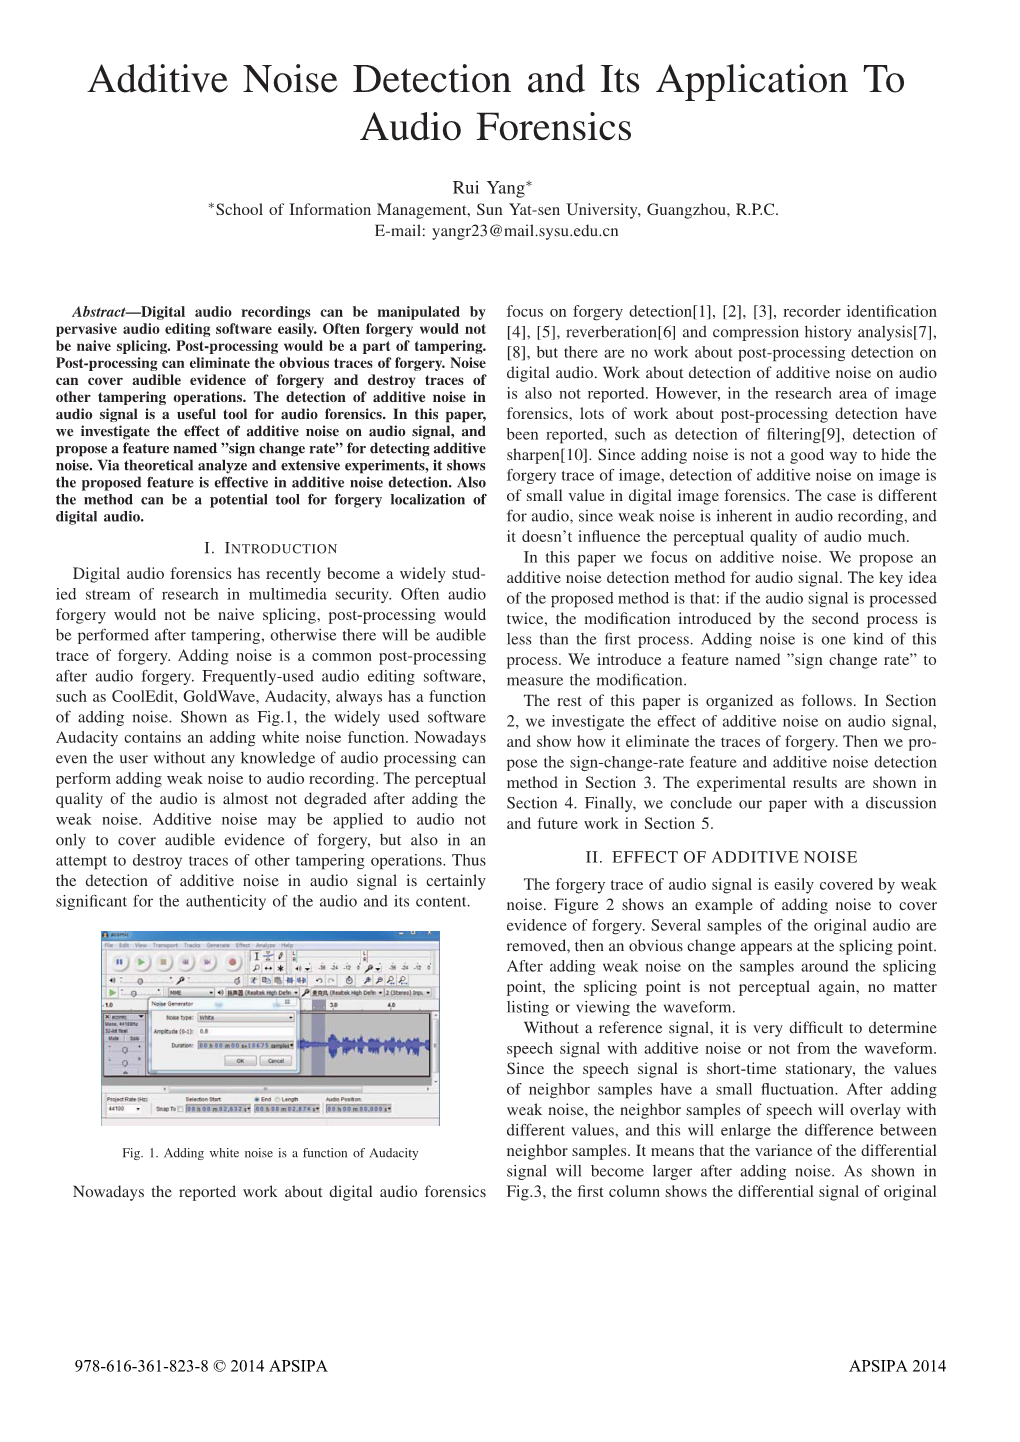 Additive Noise Detection and Its Application to Audio Forensics